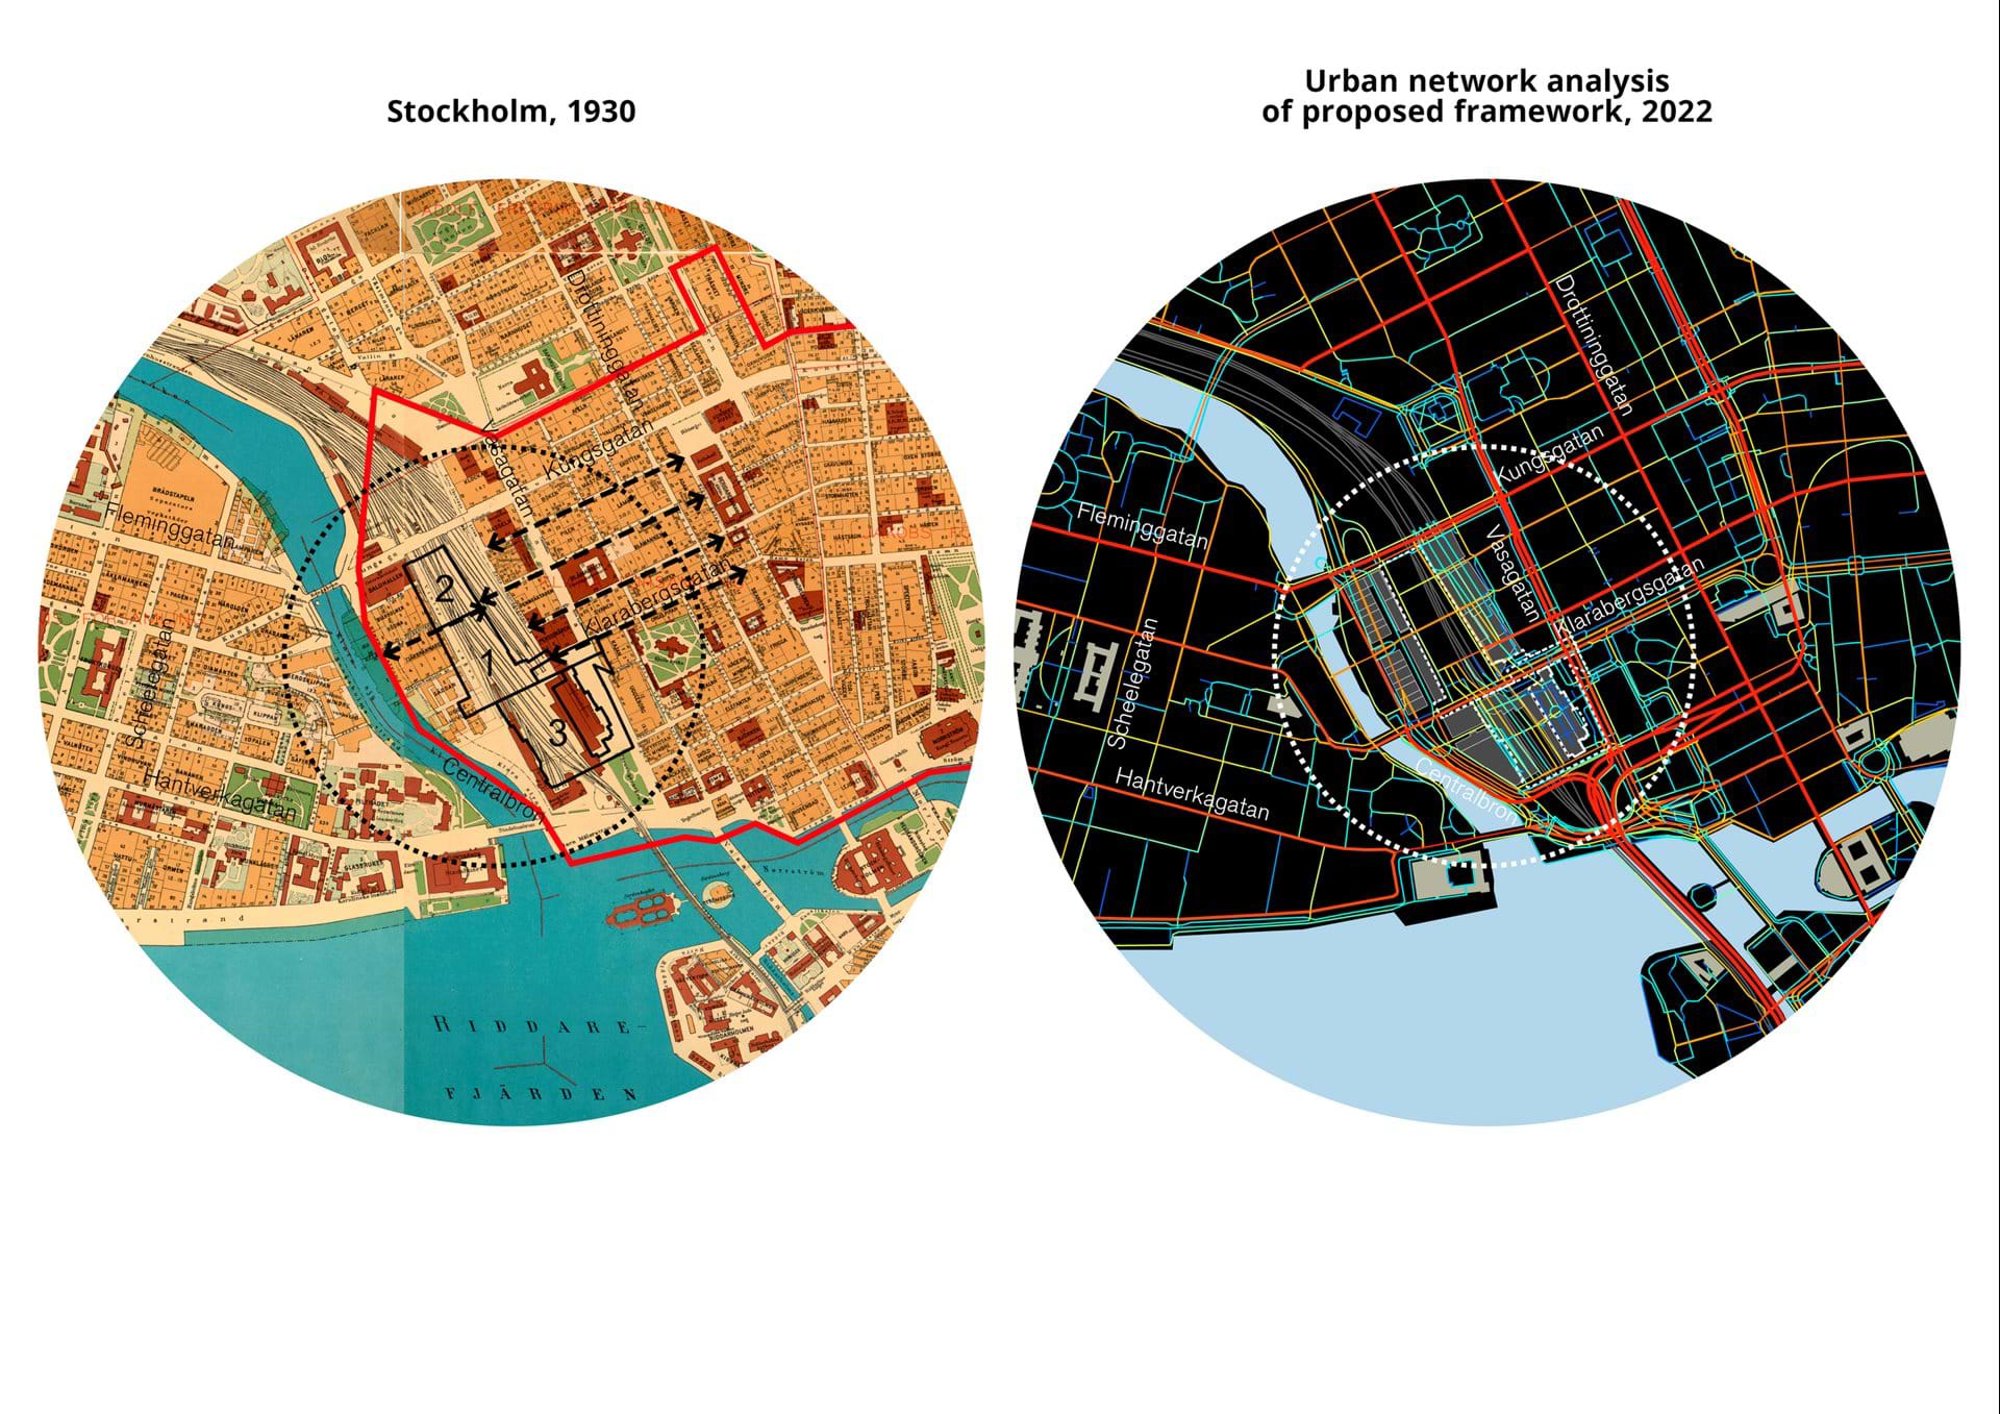 Historic maps of the city act as a main design driver for the proposal for the Stockholm Central Station competition; the UDG investigated compared early city grids of the Central Station area with analysis of the existing street connectivity to better understand current connectivity and identify opportunities for improvement. © Foster + Partners